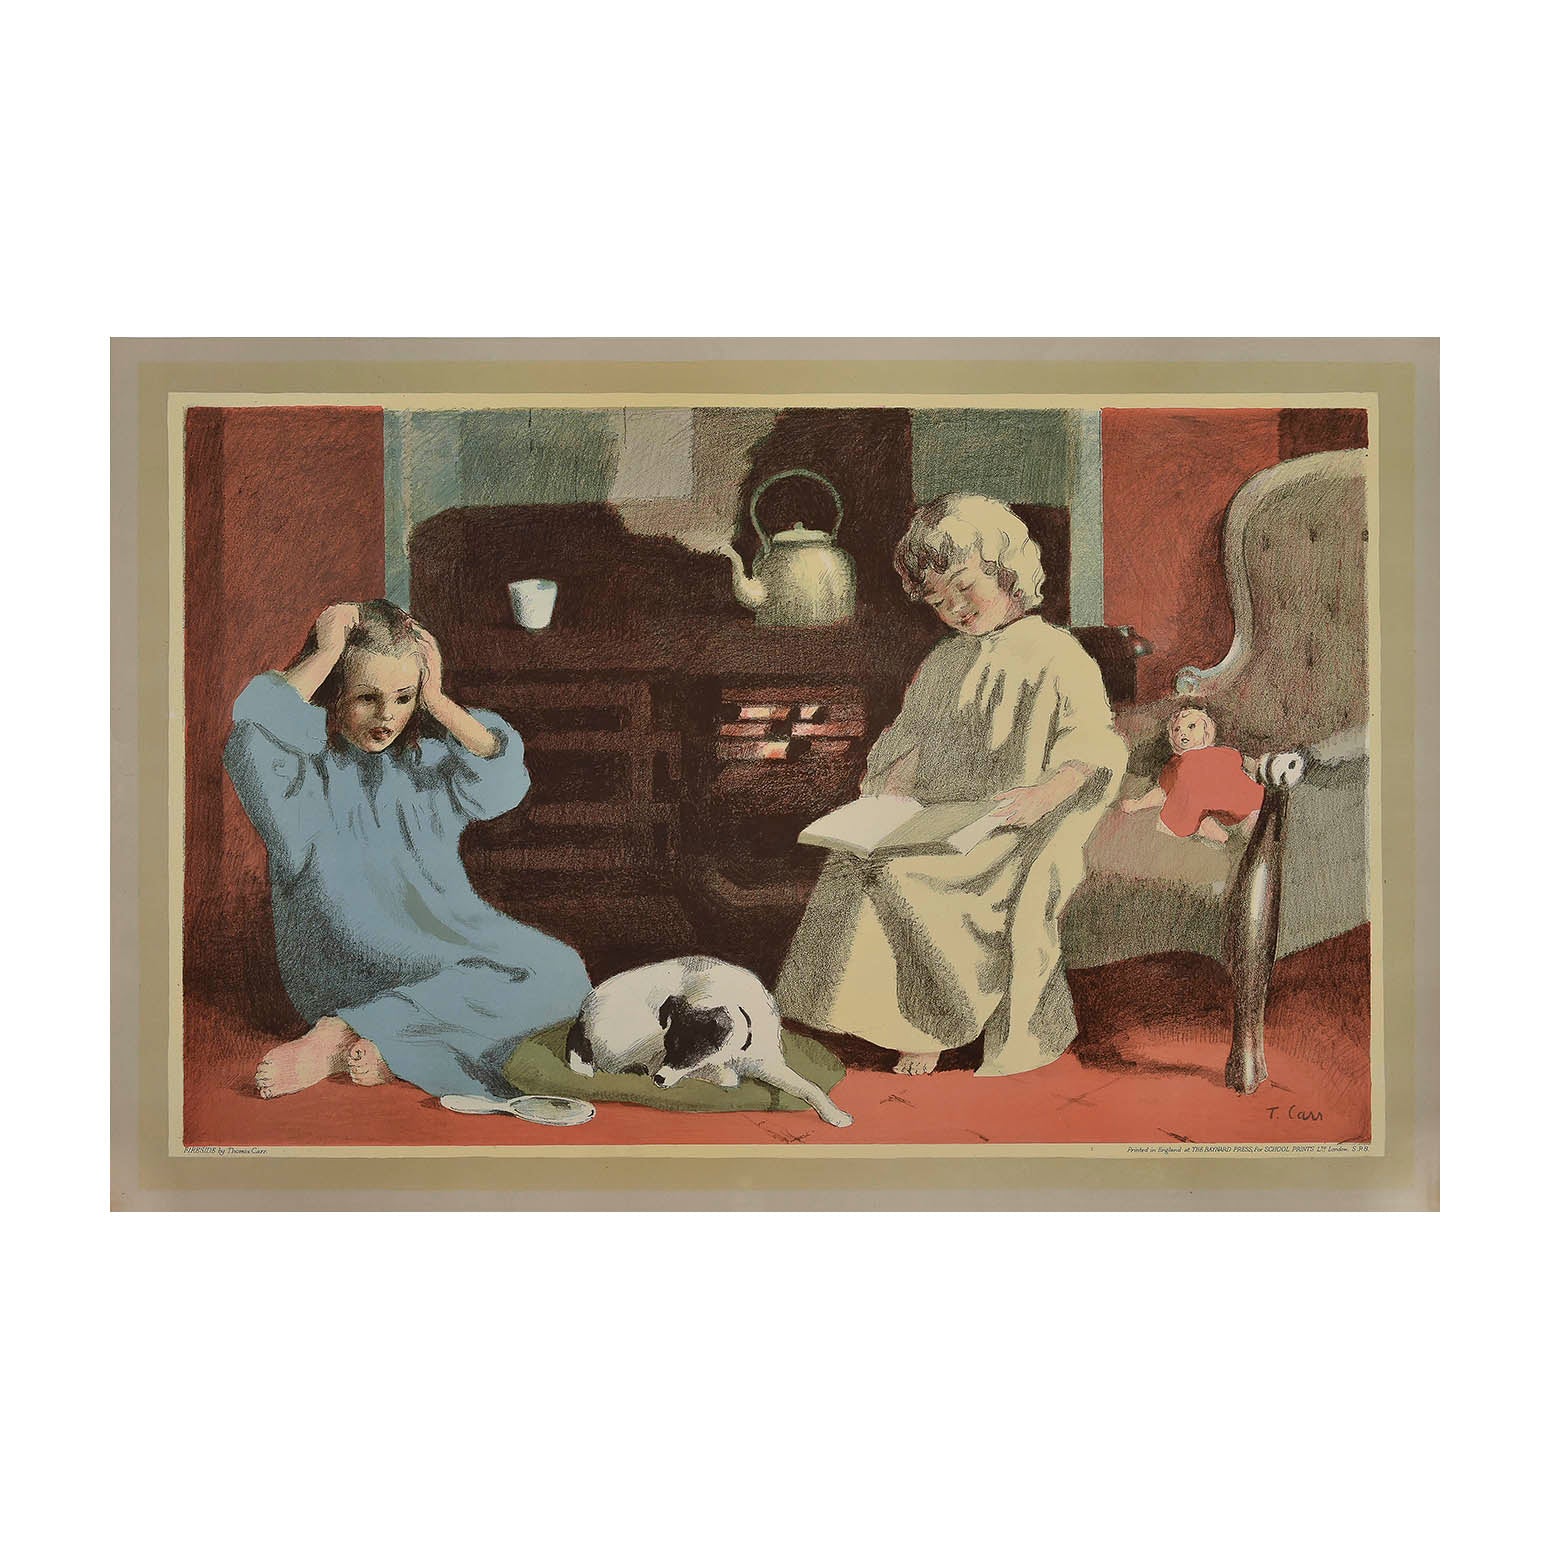 Original ‘School Print’, Fireside, by Thomas Carr, and published by School Prints Ltd, 1946. The design depicts two children and a sleeping dog sitting next to an open range stove